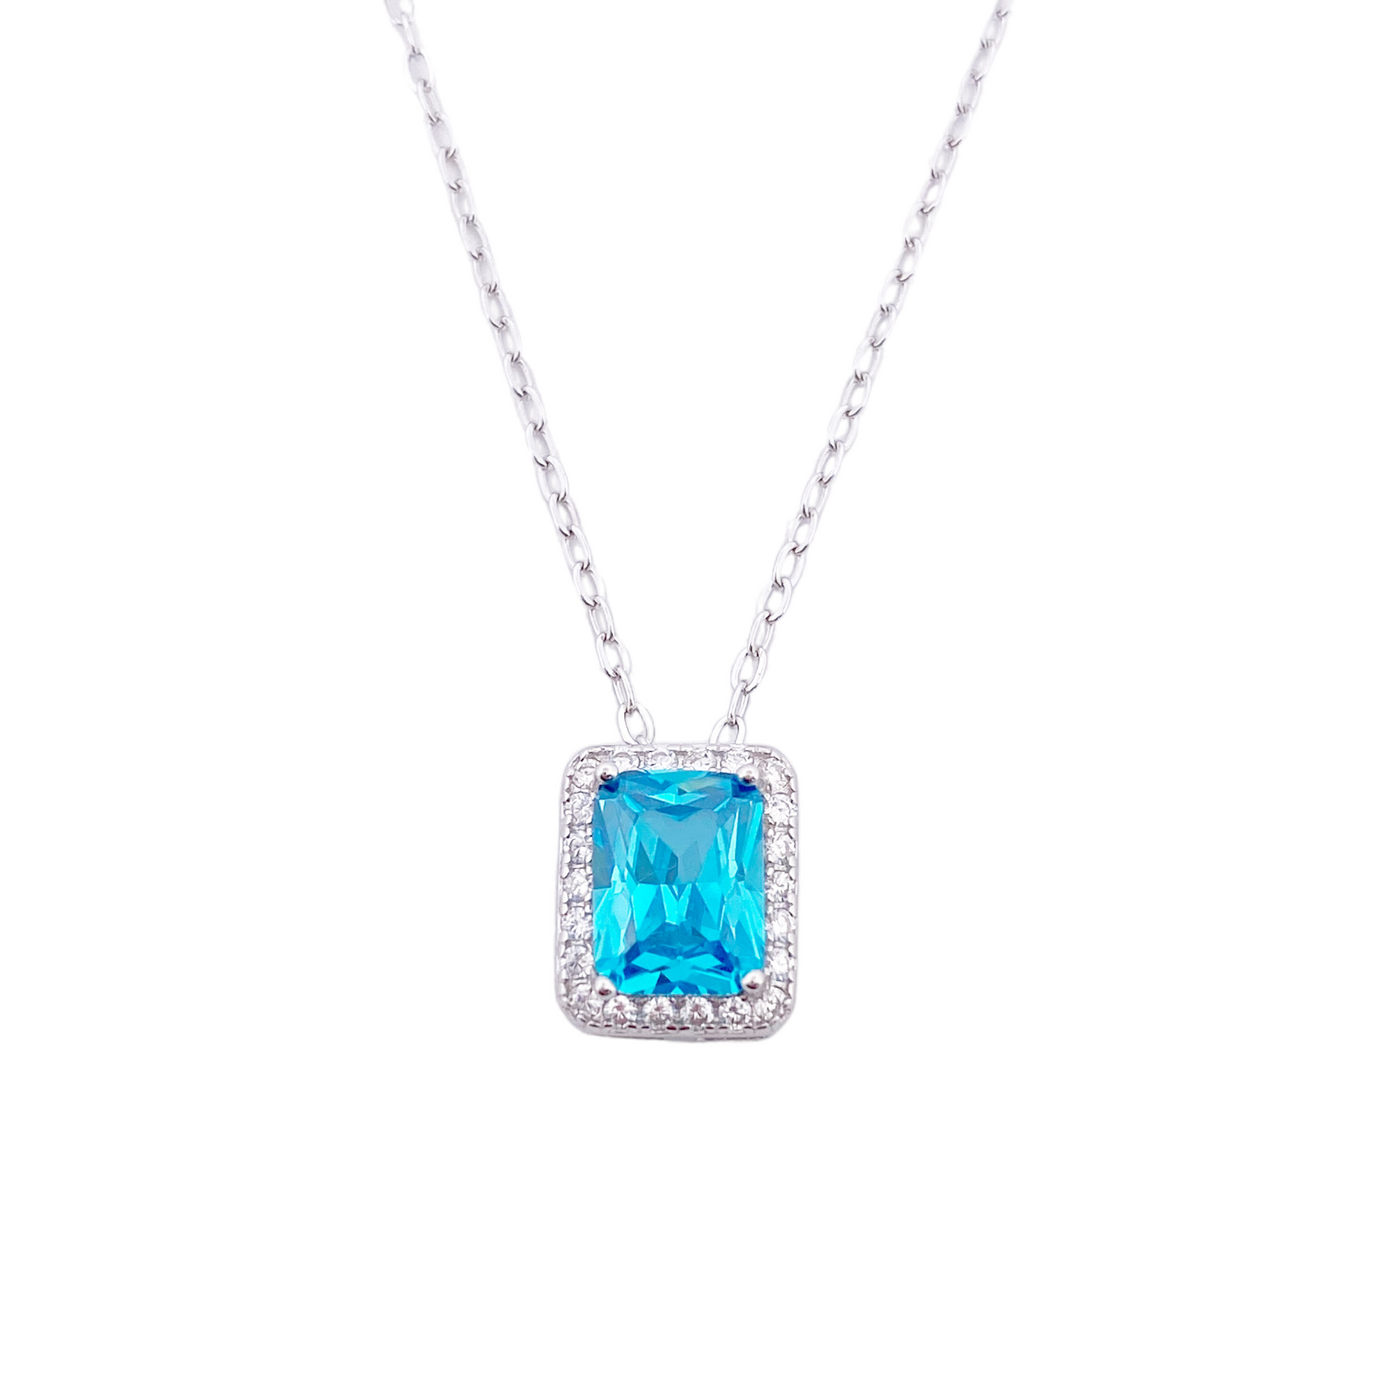 SILVER NECKLACE WITH OCTAGONAL STONE AND CZ